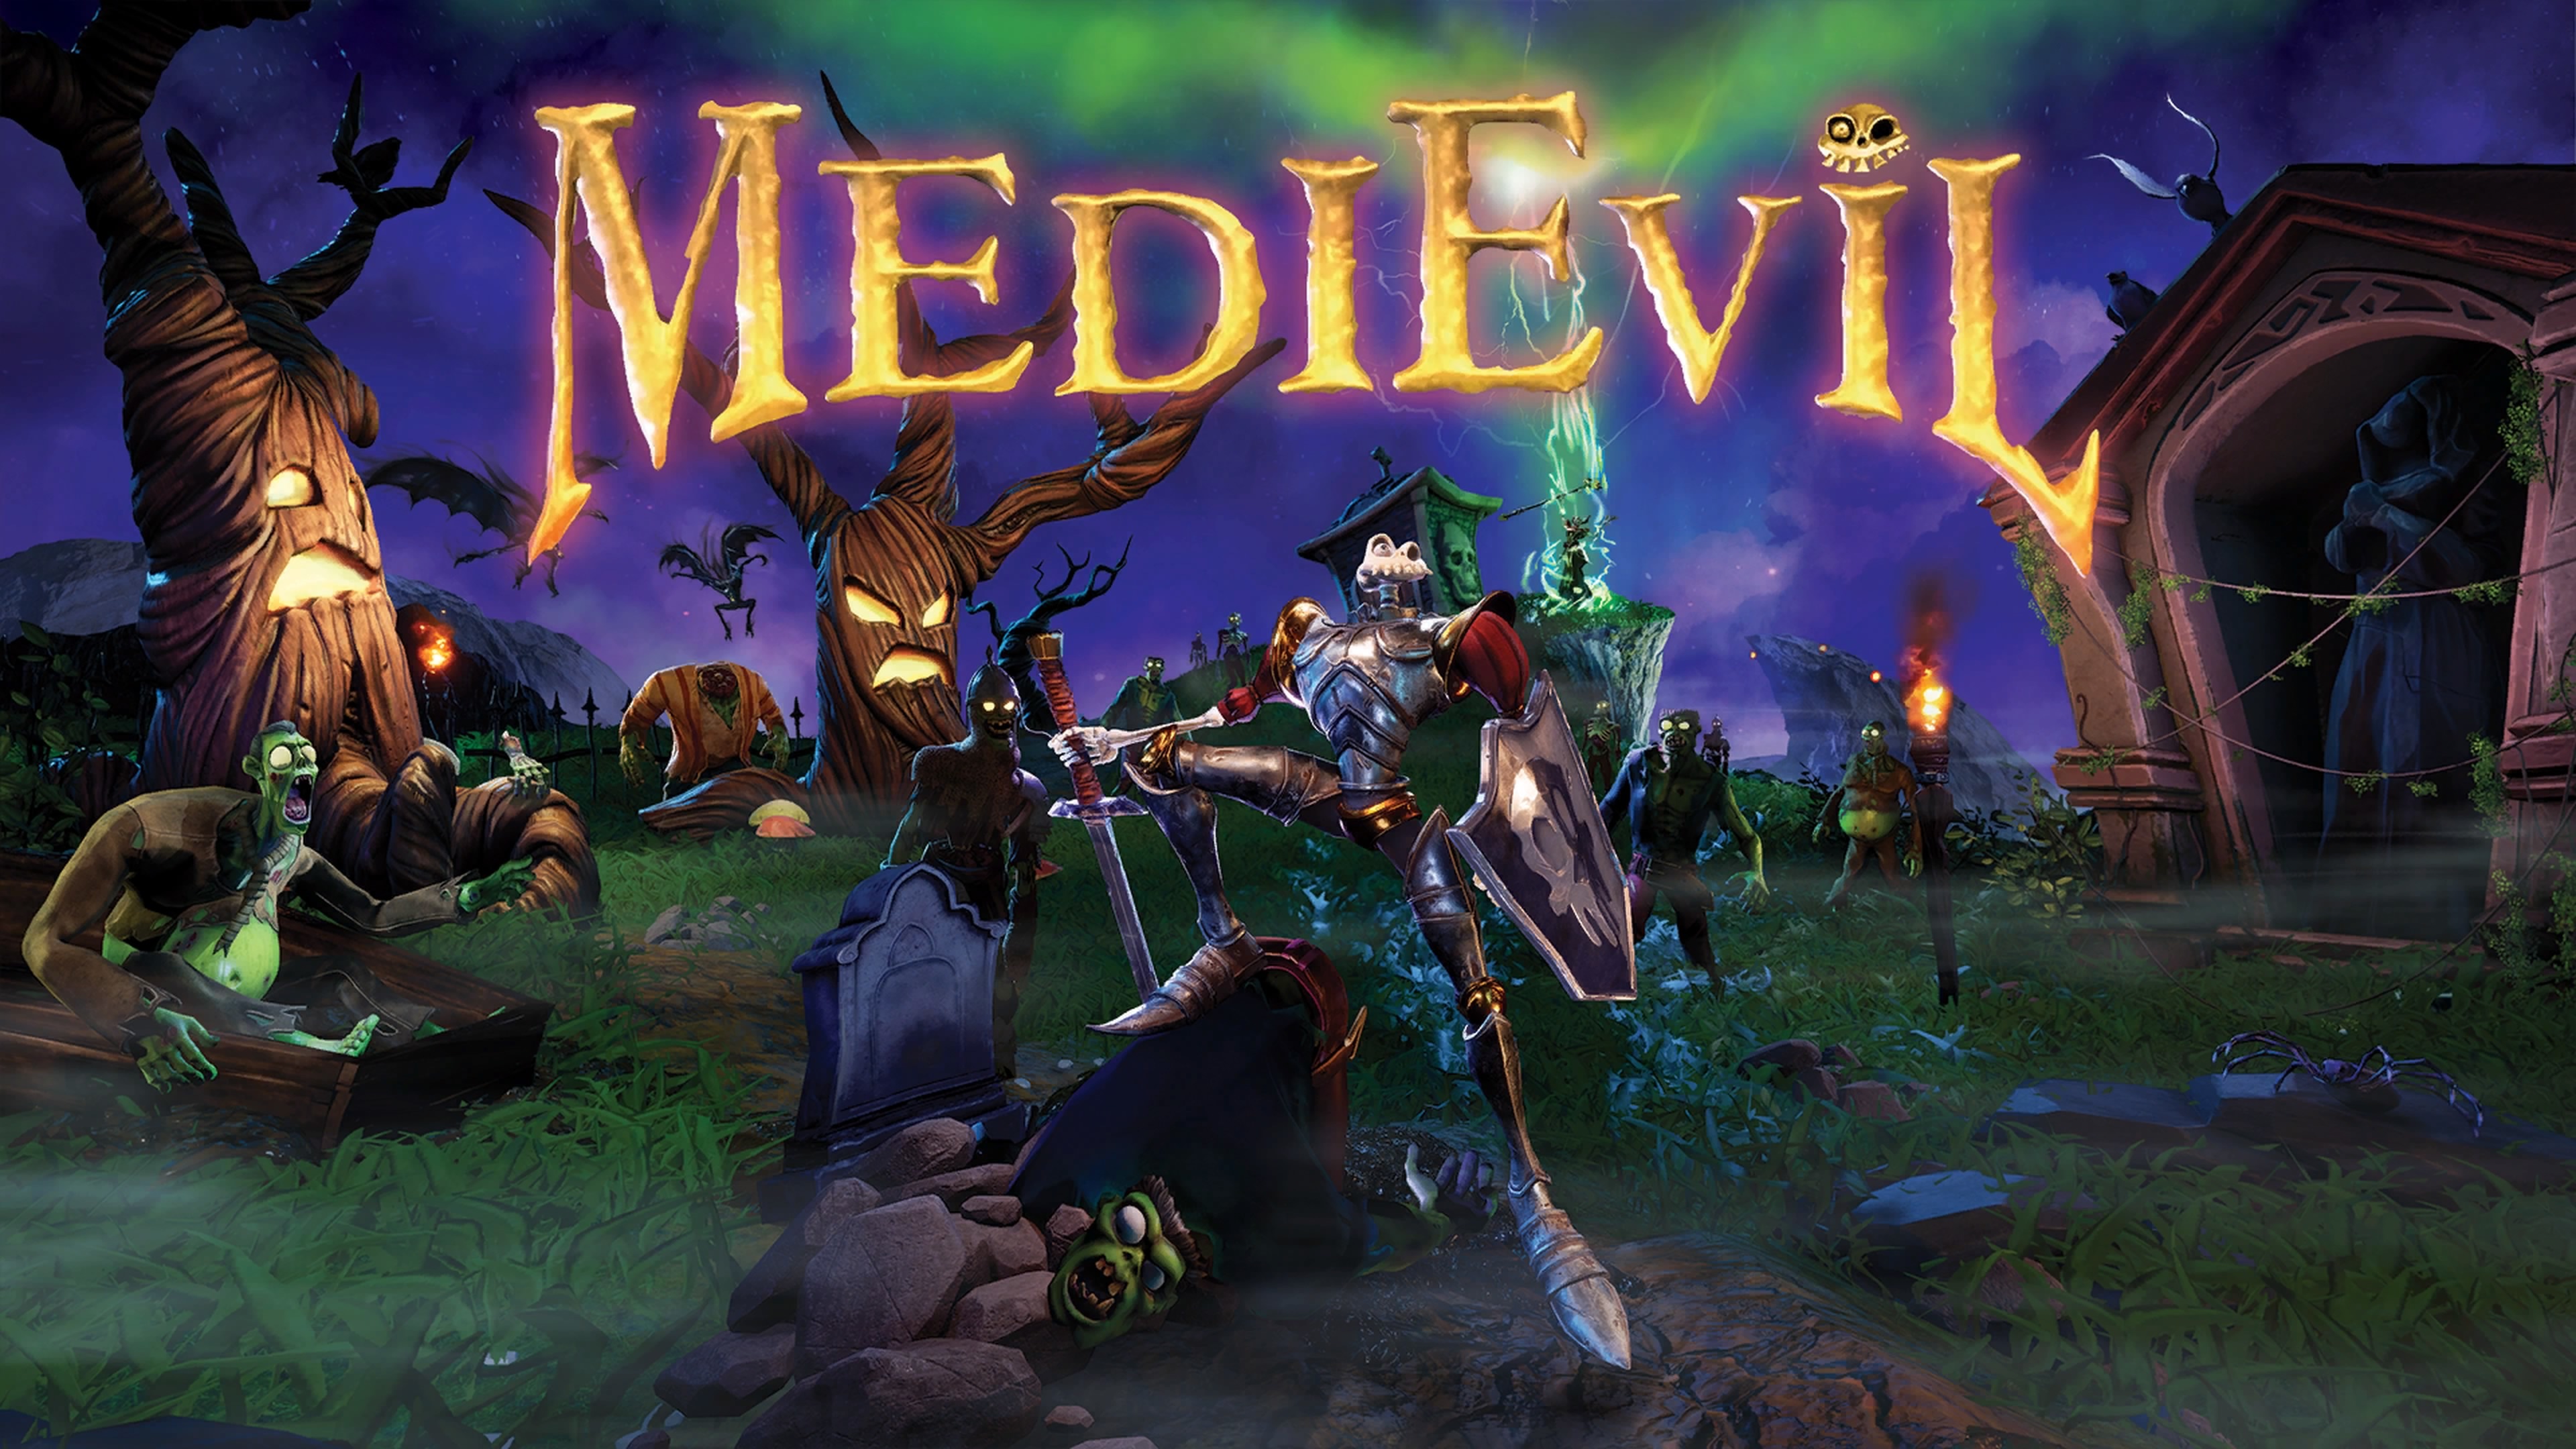 Medieval ps1. Medievil Remake 2019. Medieval ps4. Medieval Remastered ps4. Medieval ps4 обложка.